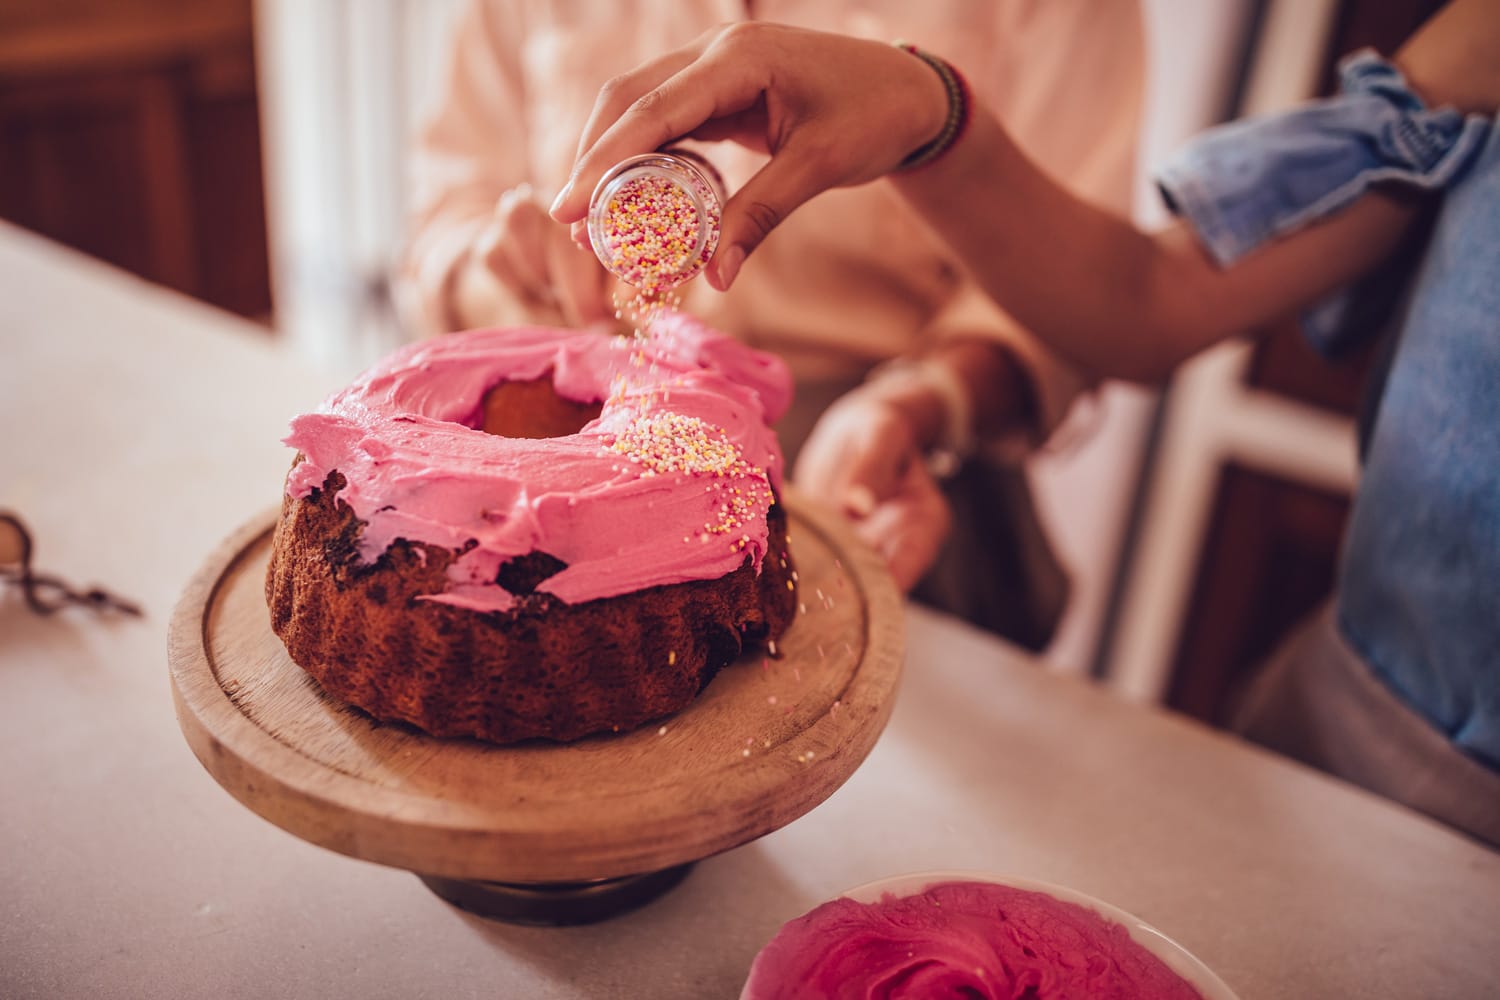 Girl decorating homemade cake with pink icing and colorful sprinkles while baking at home